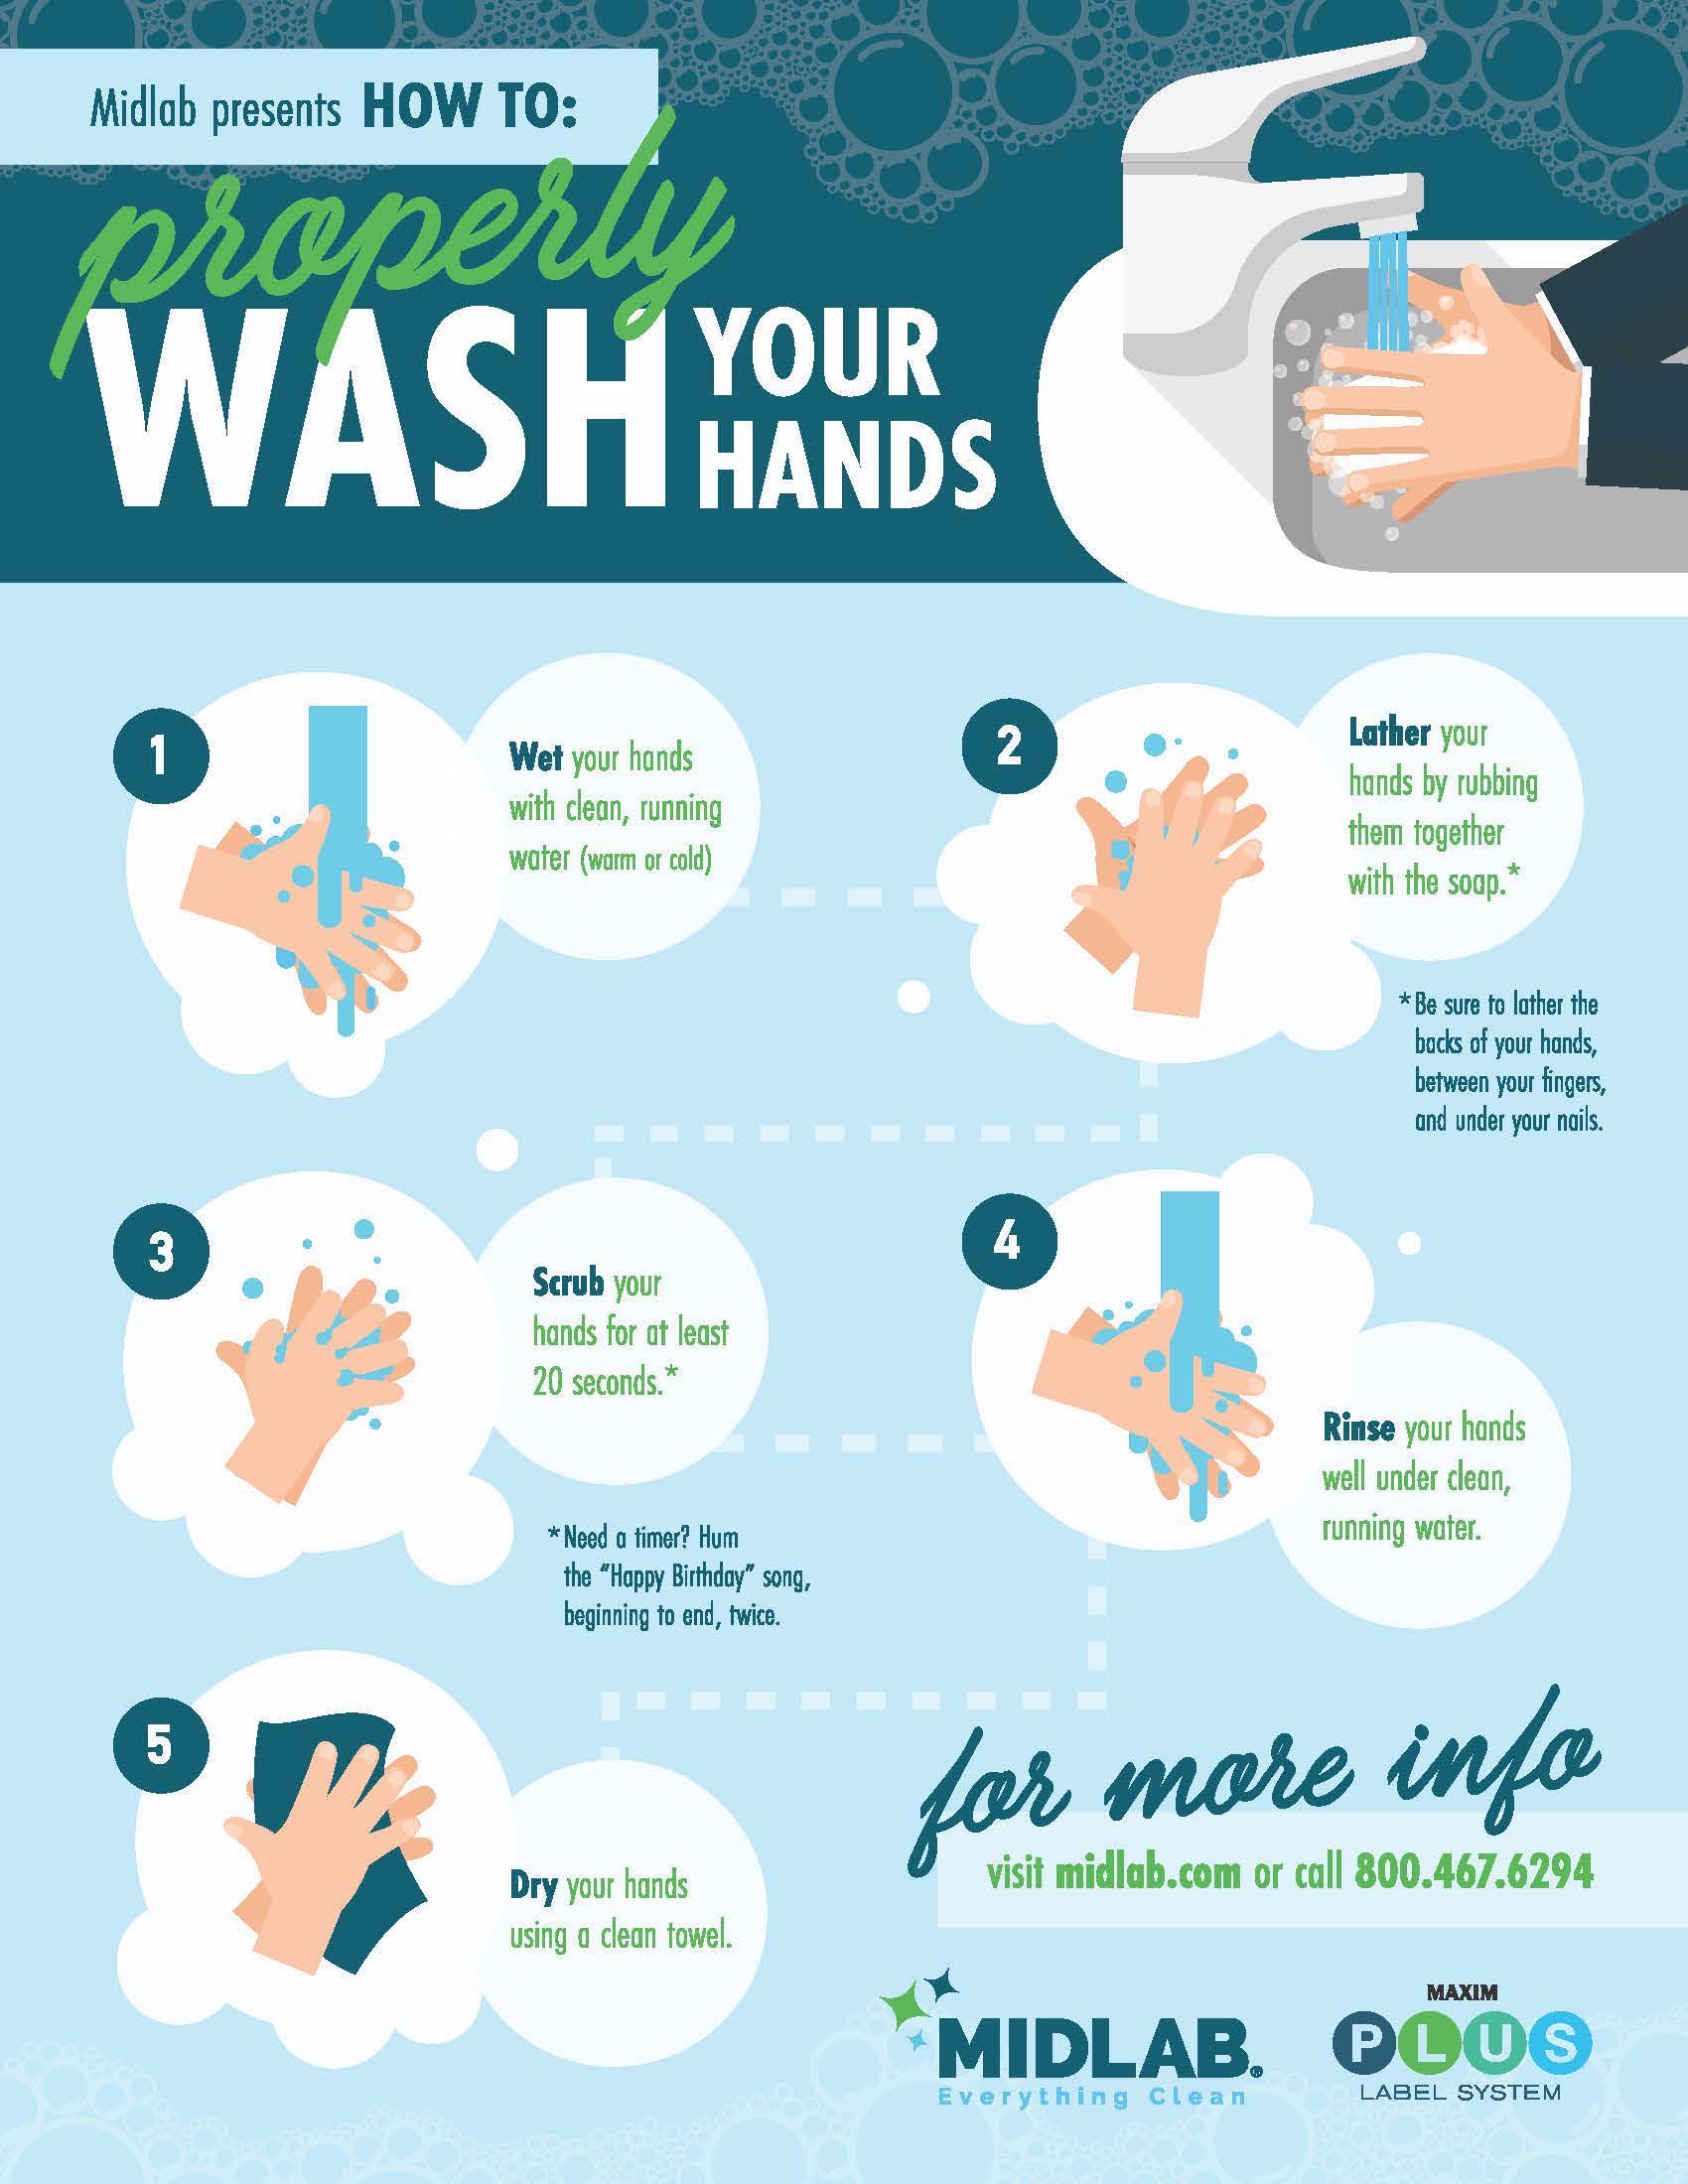 How to Properly Wash Your Hands - Midlab, Inc.